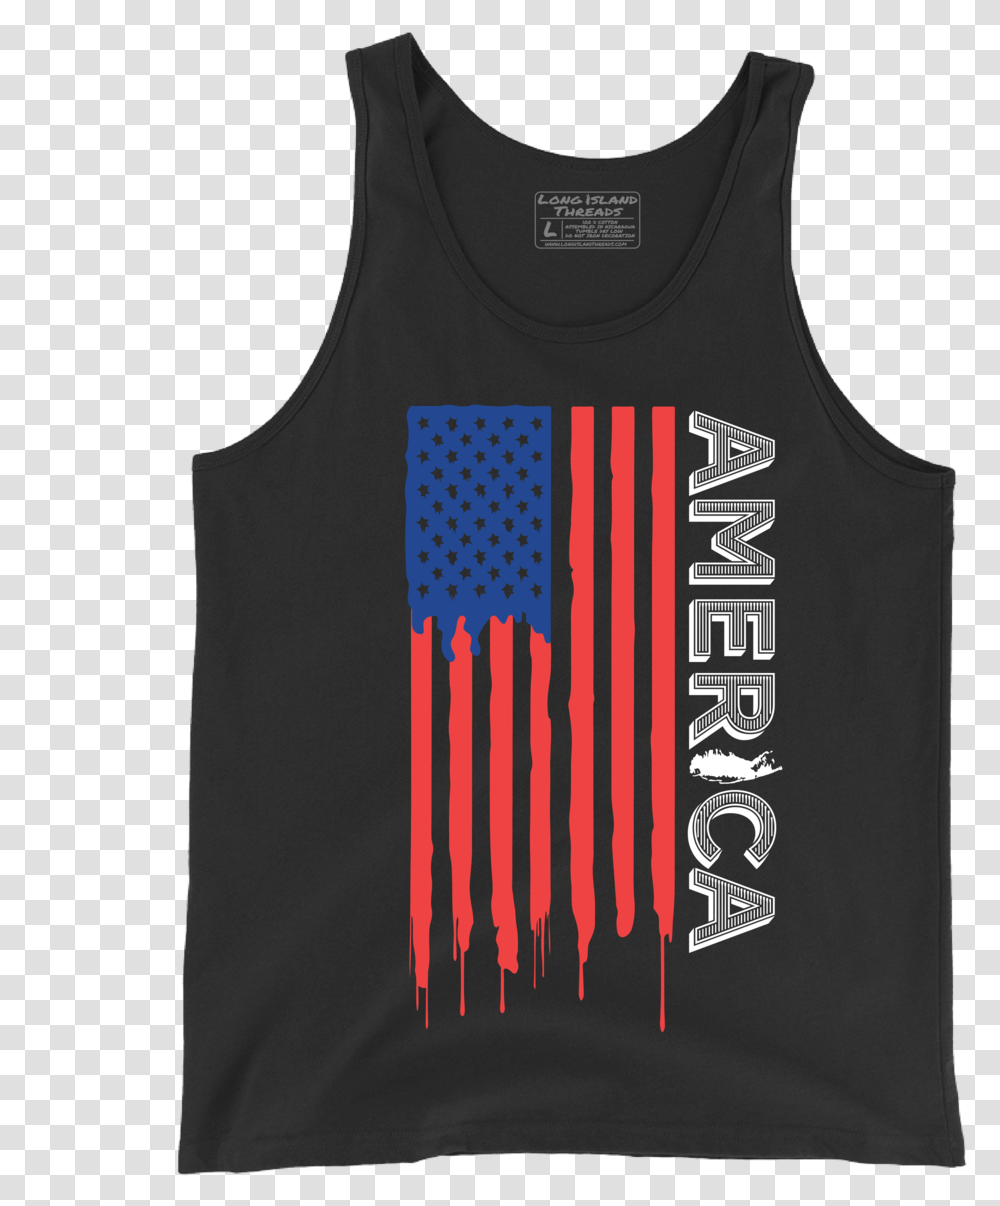 Long Island X America Dripping Paint Tank Top Black Active Tank, Clothing, Apparel, Vest Transparent Png